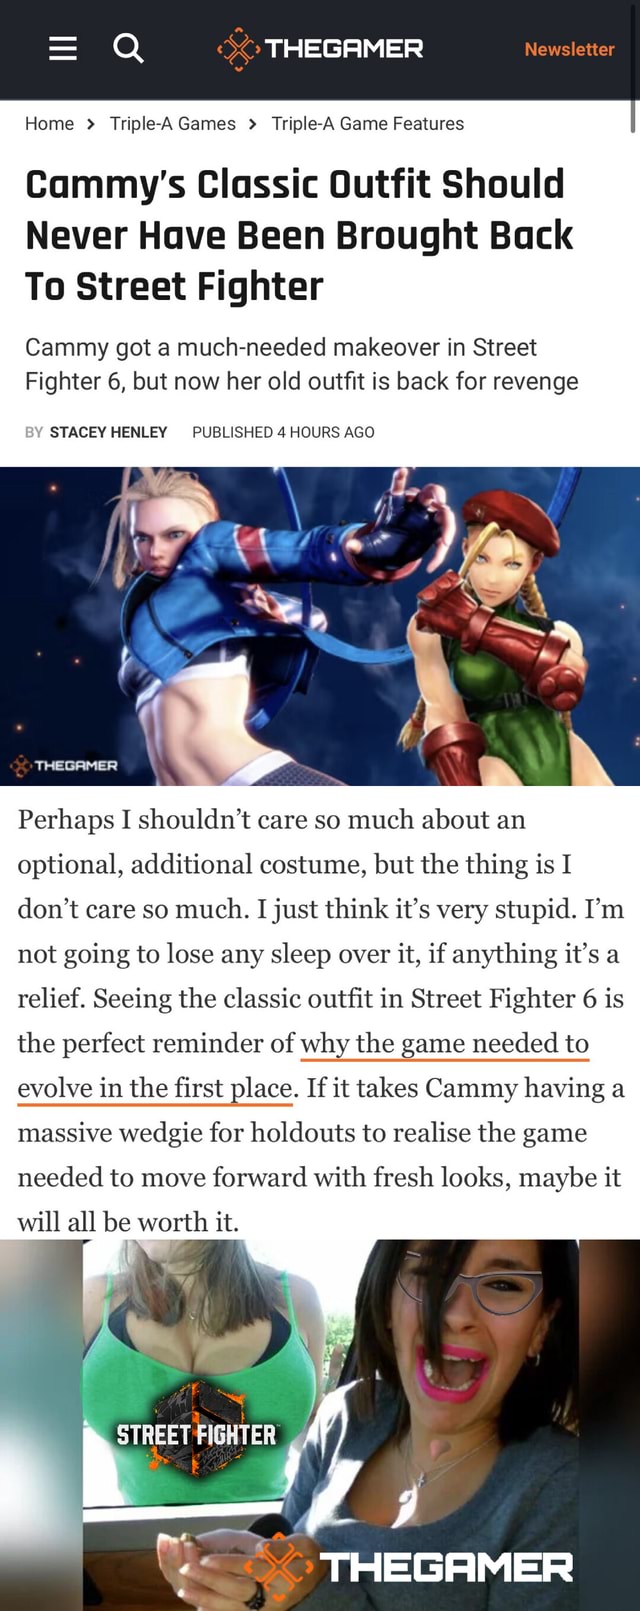 Cammy's Classic Outfit Should Never Have Been Brought Back To Street Fighter